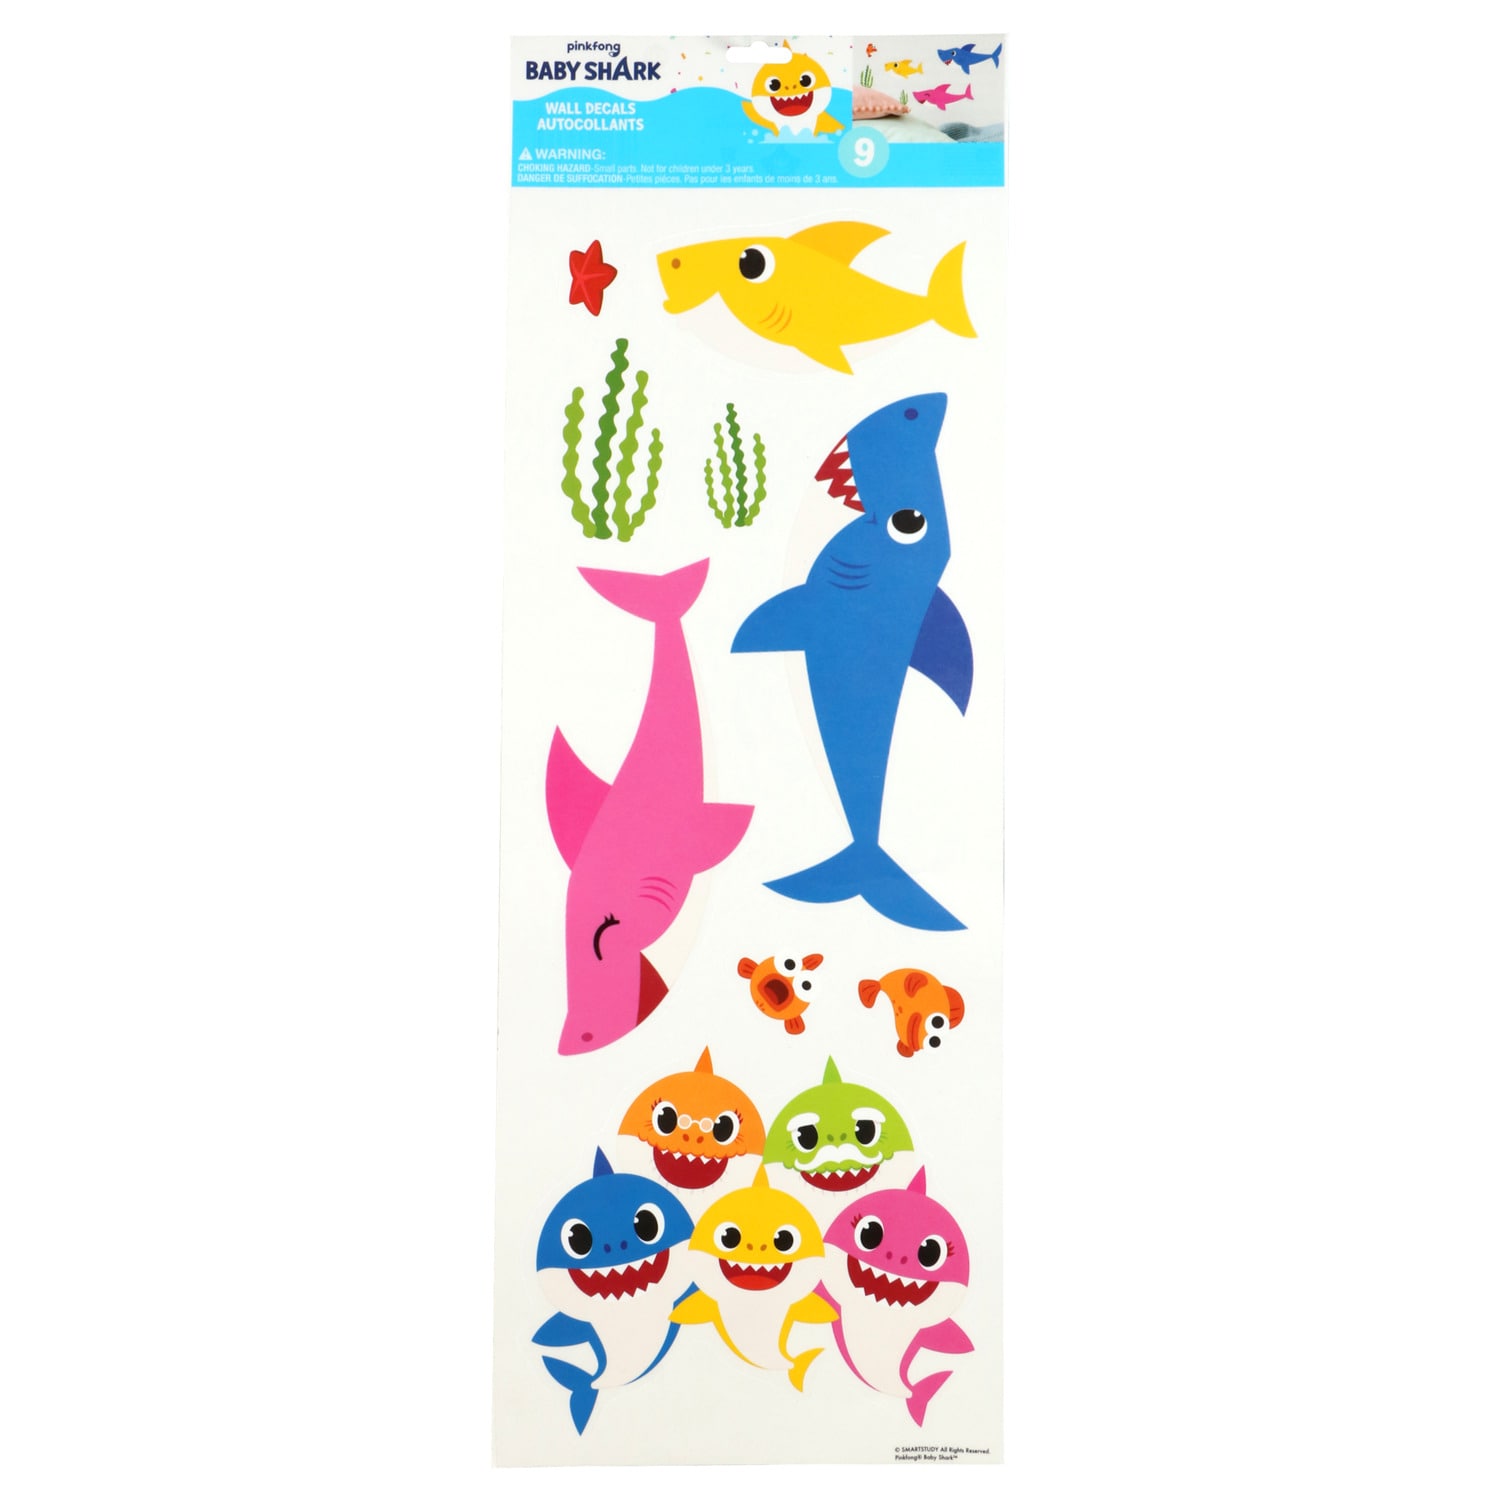 View Pinkfong Baby Shark Wall Decals,